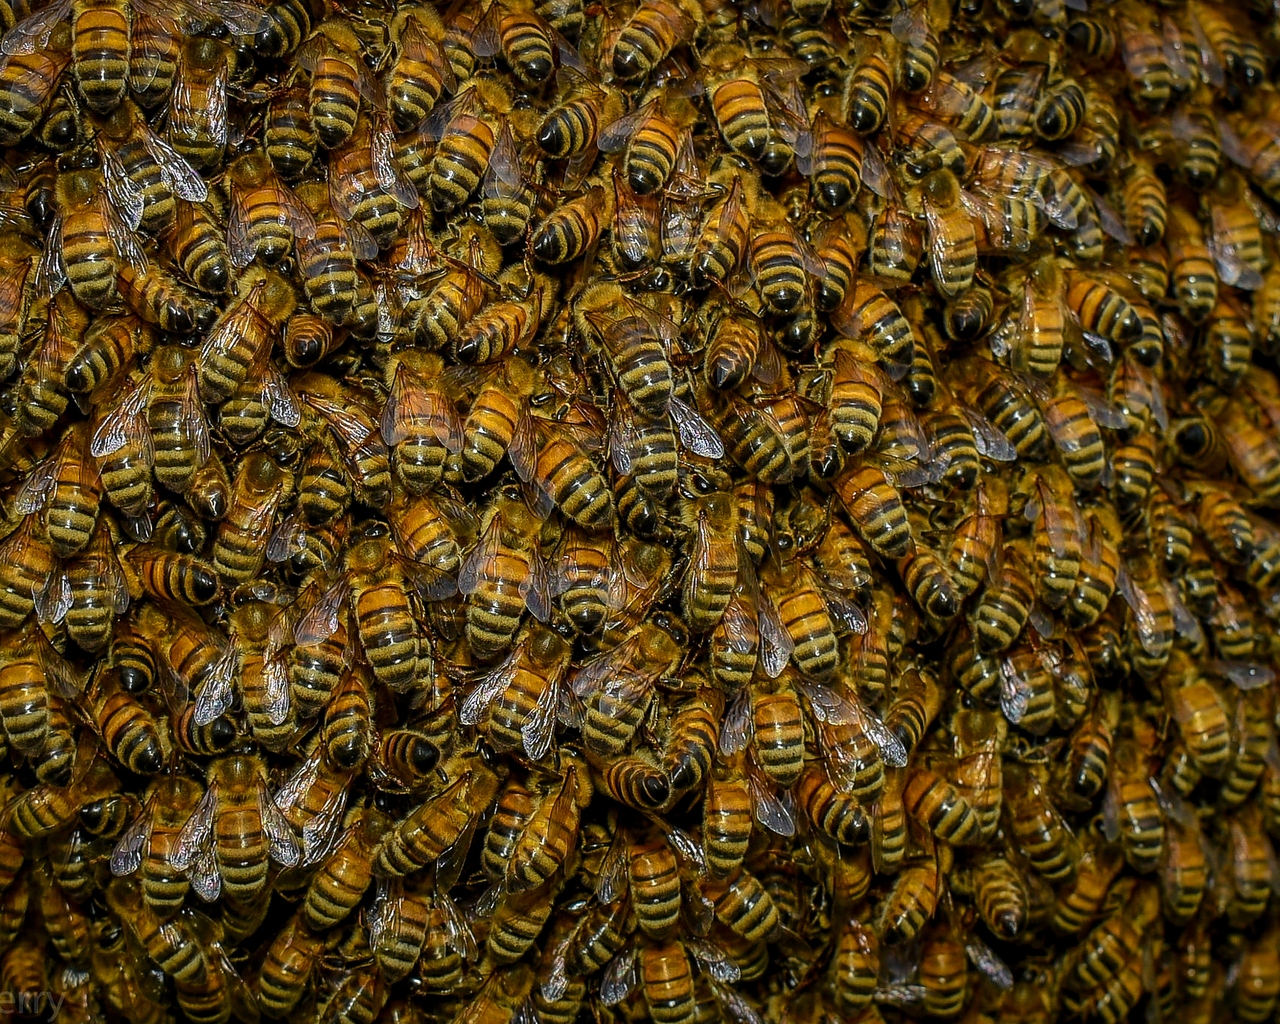 Swarm of Bees for 1280 x 1024 resolution